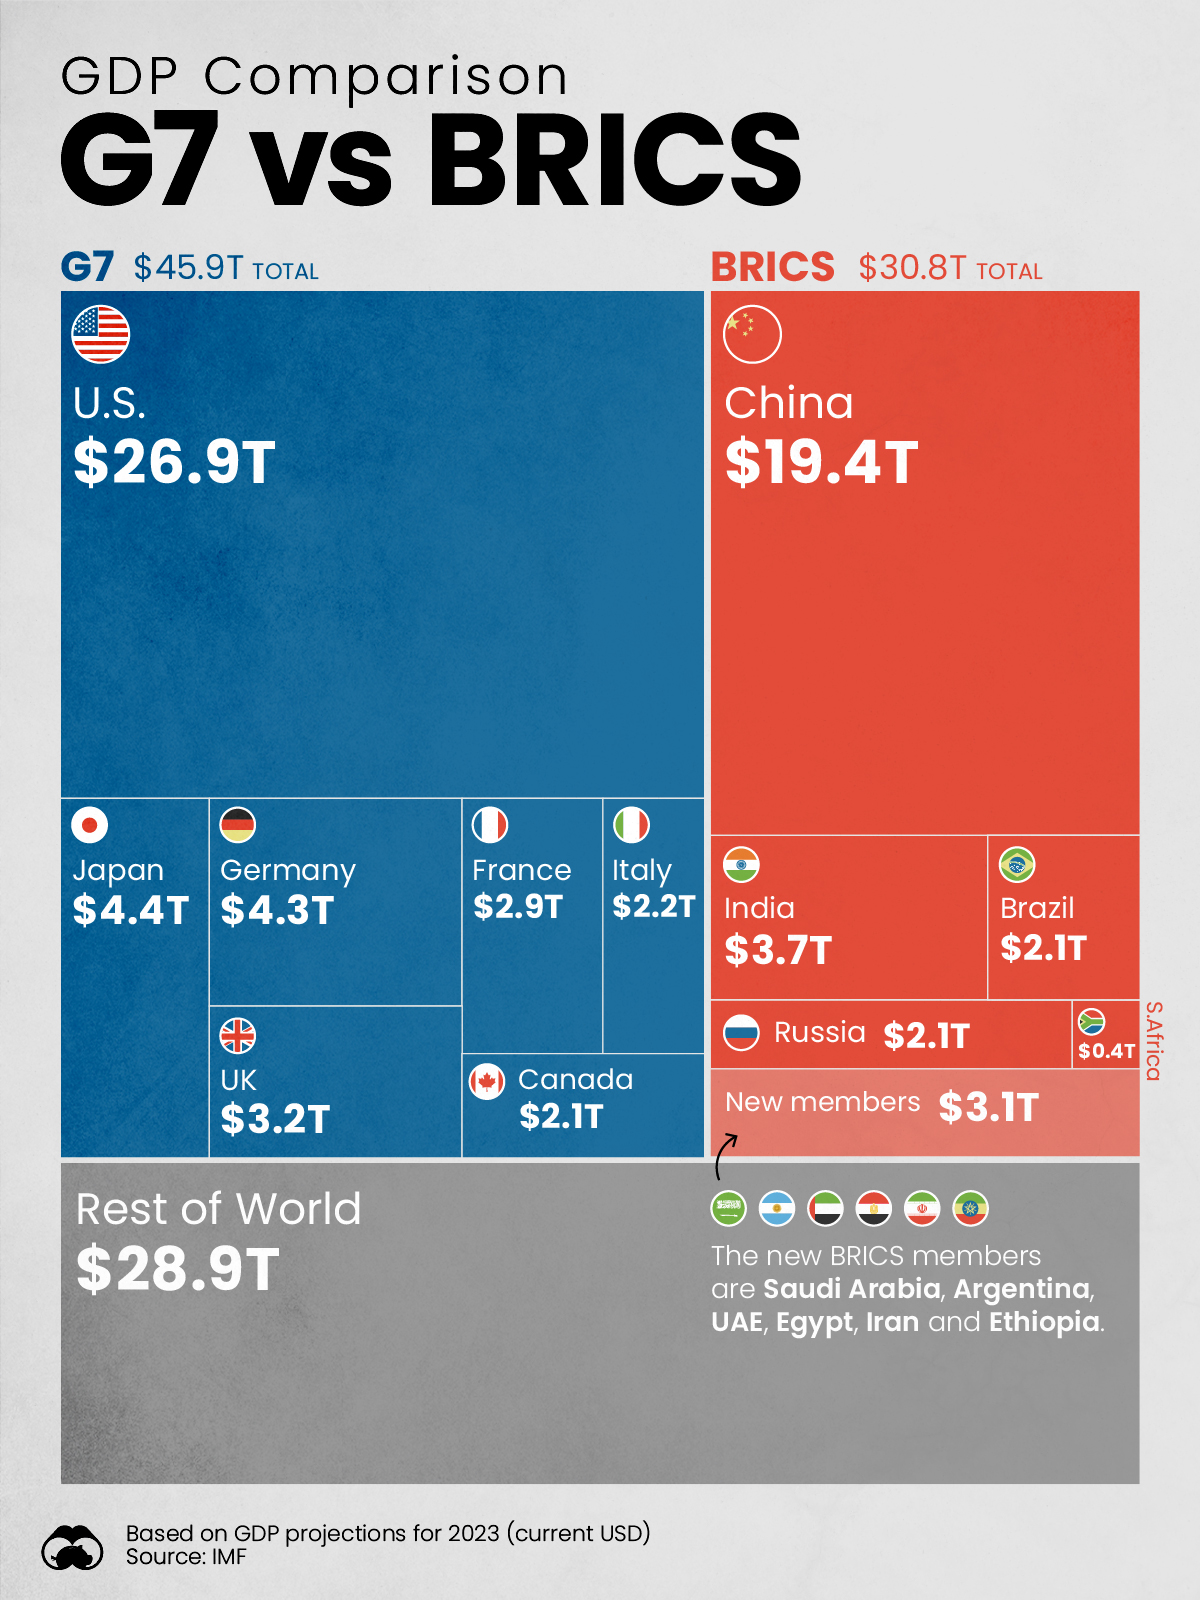 Visualization comparing BRICS GDP with G7 GDP in U.S. dollars.